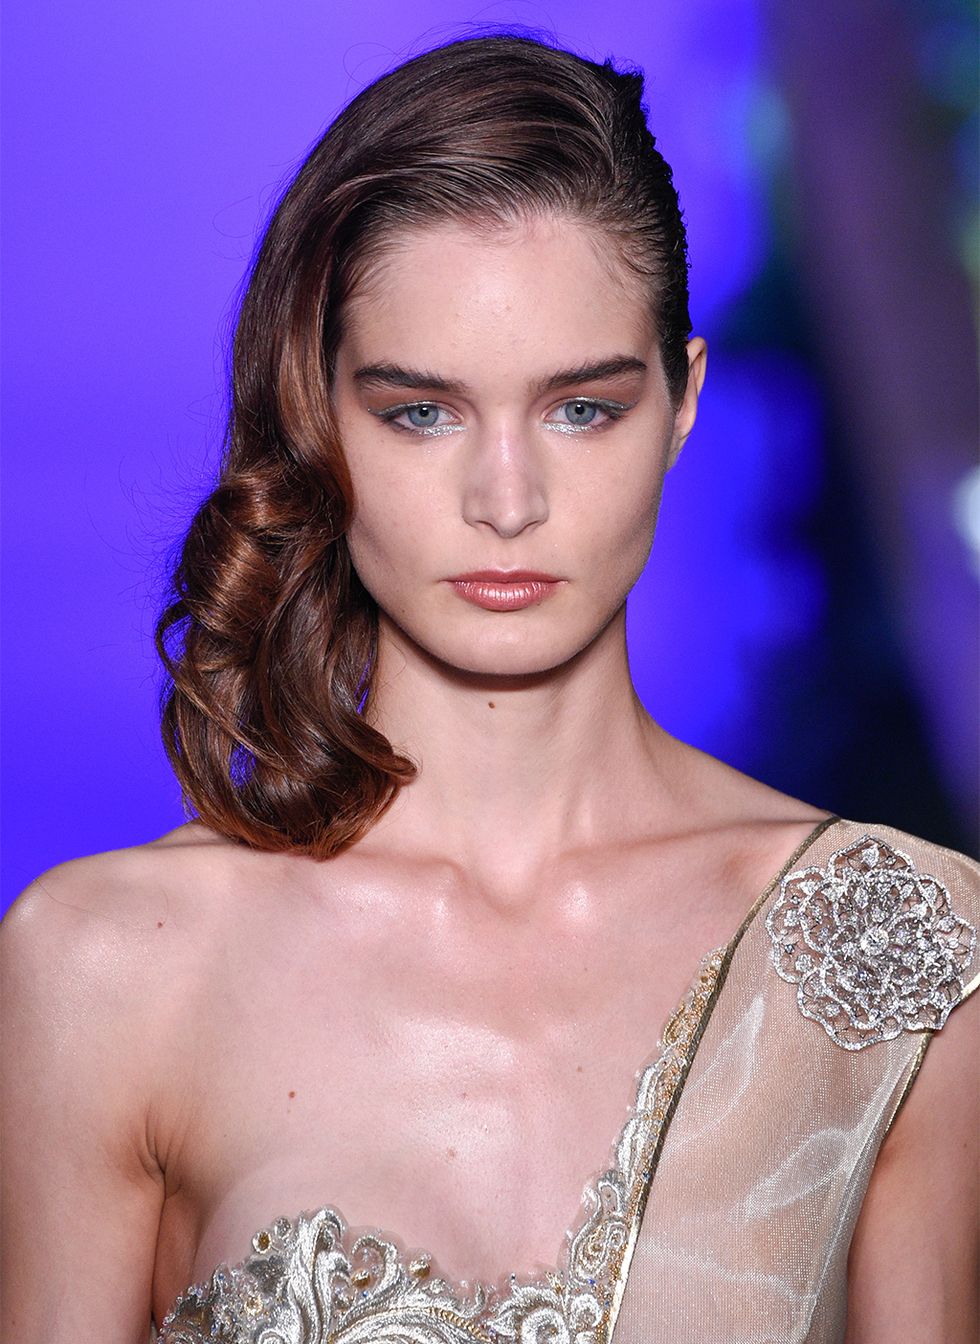 Hair, Face, Fashion model, Eyebrow, Fashion, Hairstyle, Lip, Beauty, Shoulder, Haute couture, 